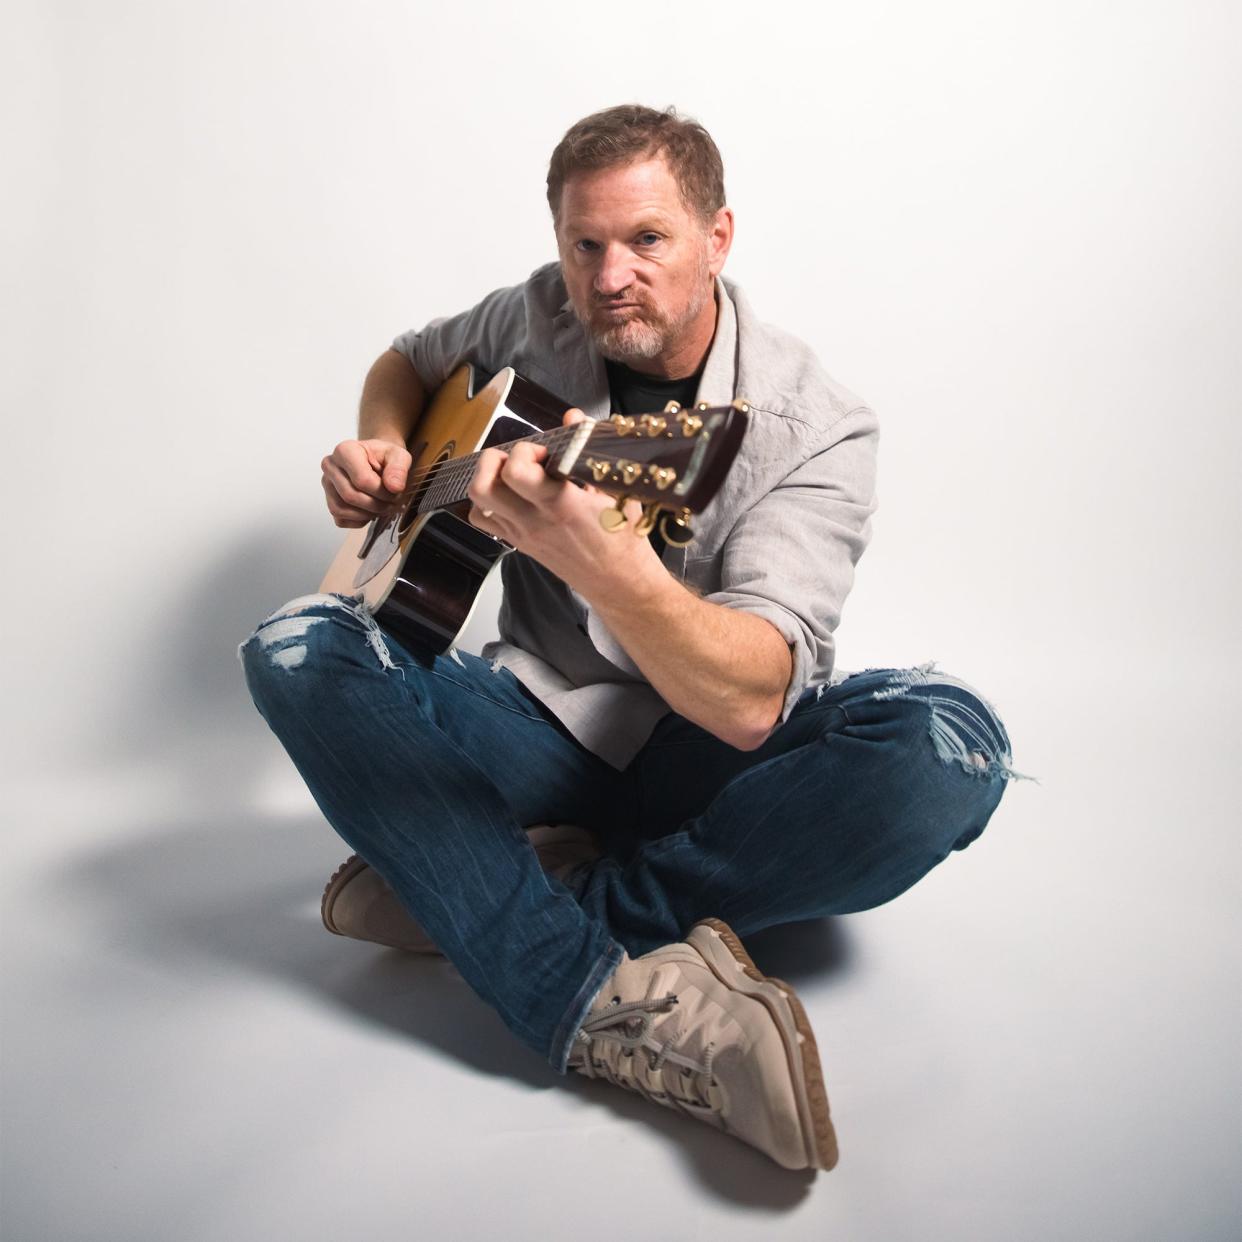 Stand-up comedian Tim Hawkins and his “clean” jokes are coming to Monroe’s Stewart Road Church of God at 7 p.m. Thursday, April 13.